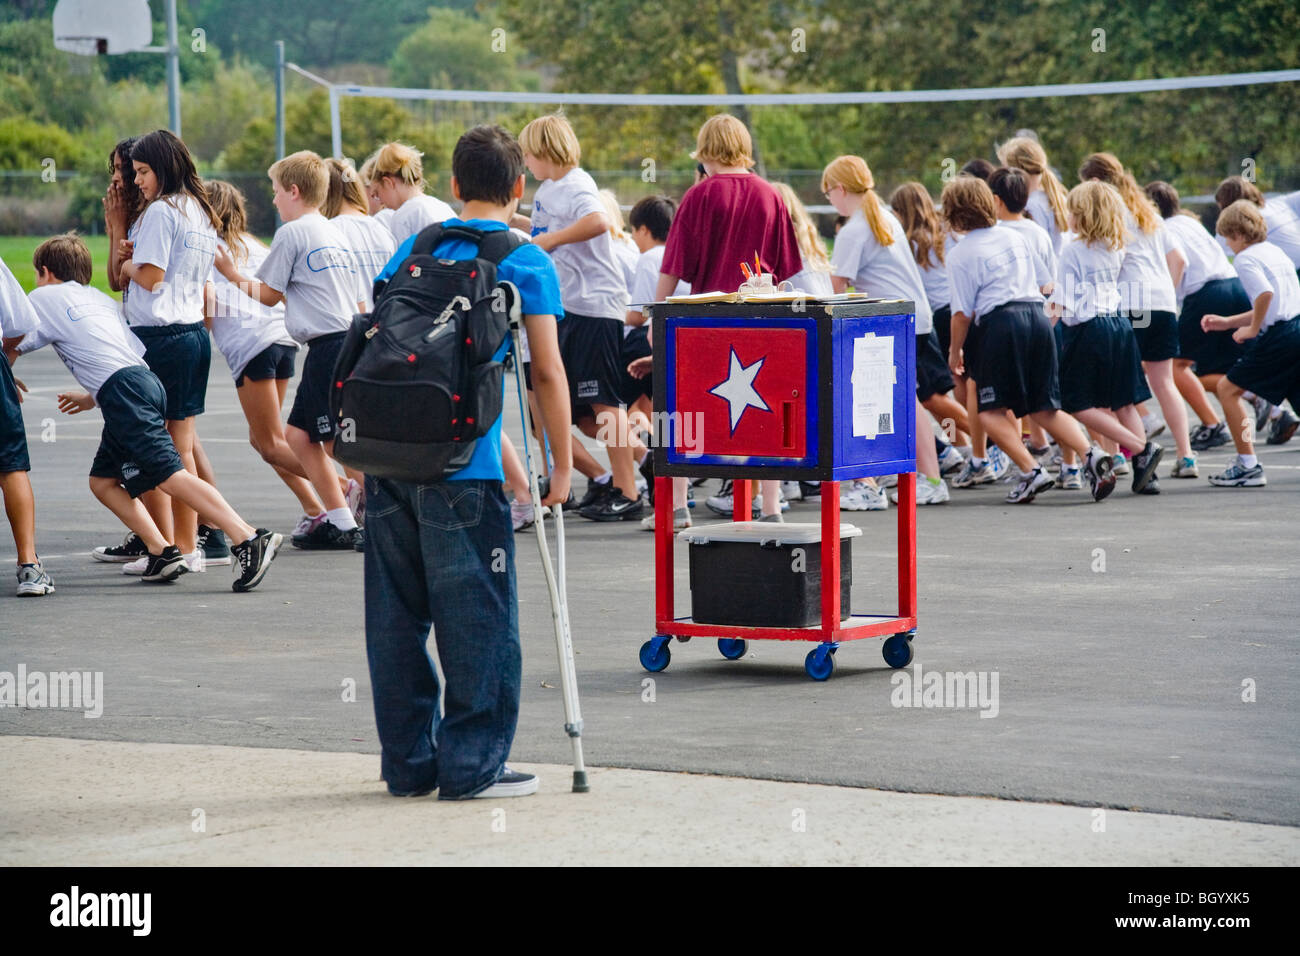 On crutches and unable to participate, a handicapped California middle school student watches a campus physical education class. Stock Photo